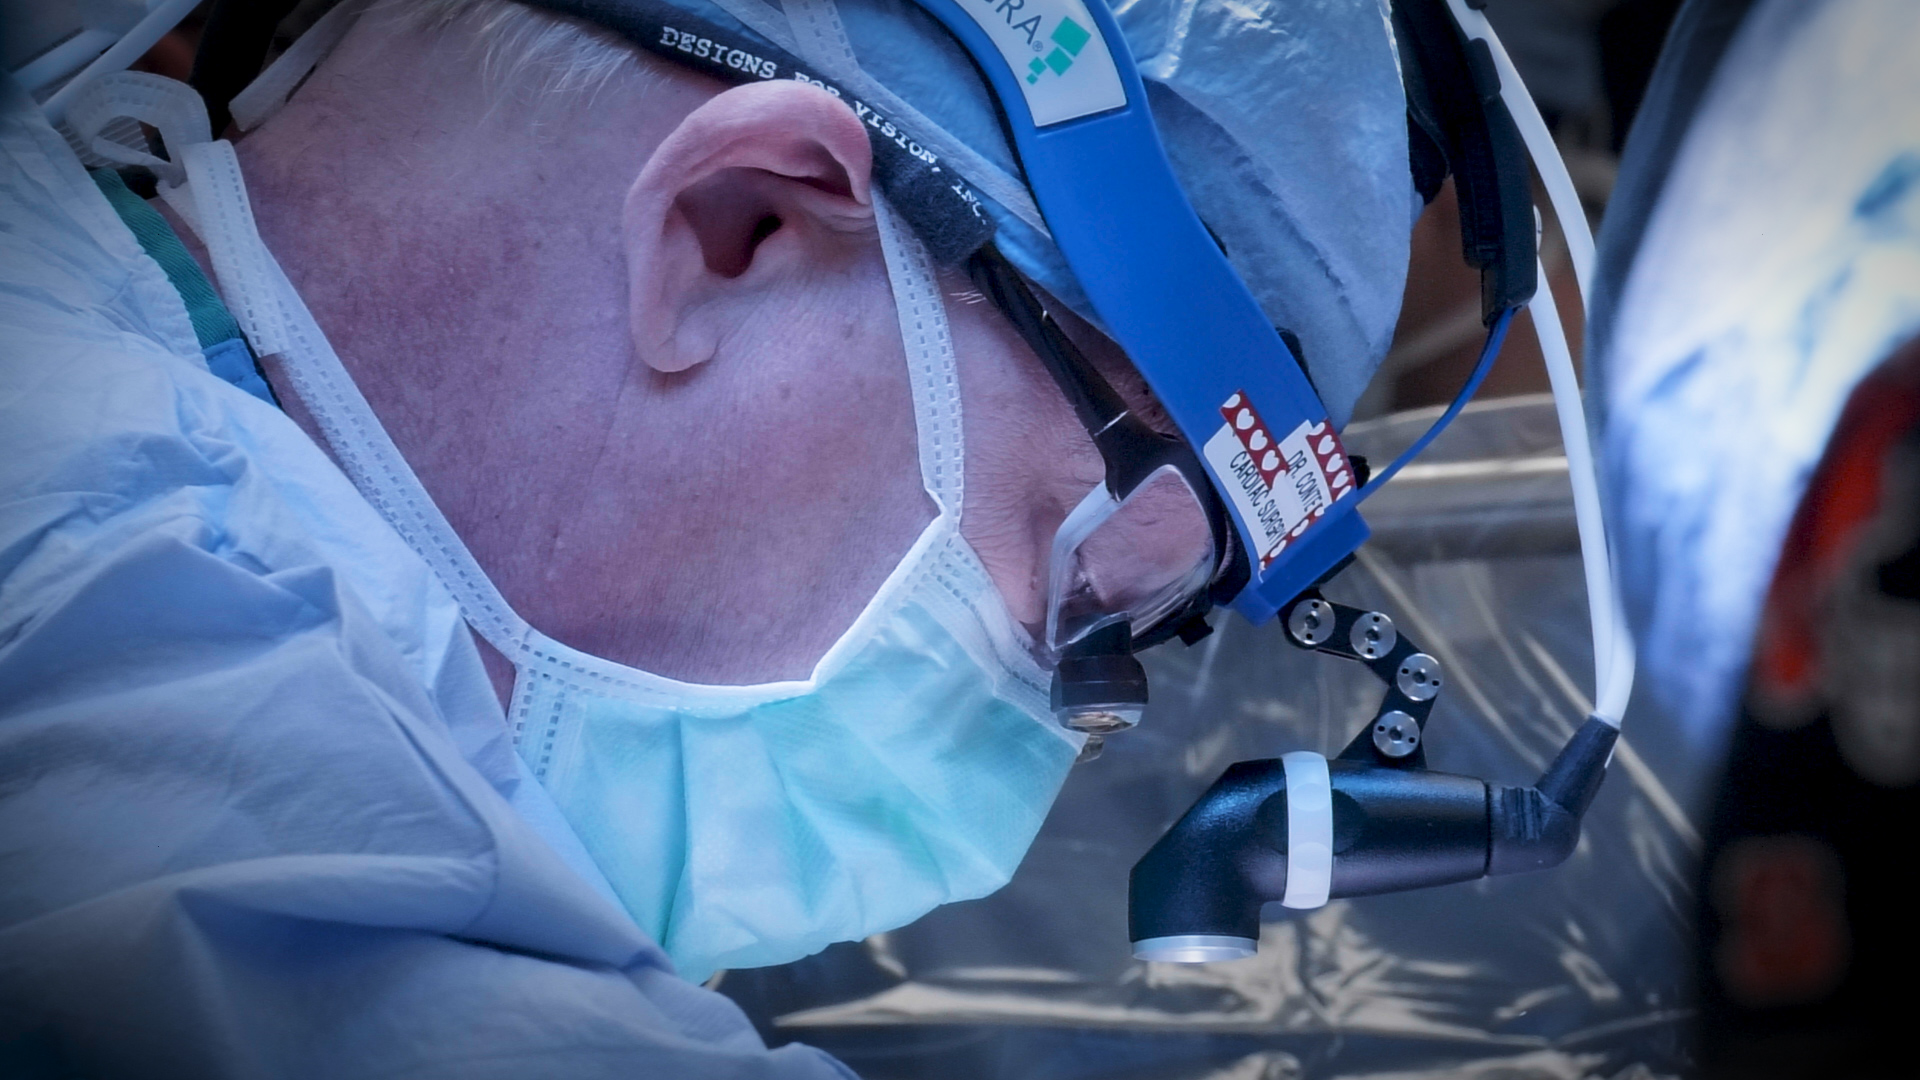 Dr. John Conte, program director of cardiac surgery at Penn State Milton S. Hershey Medical Center, performs heart surgery in the operating room. He is wearing a surgical cap, a grown, a mask that covers his mouth and small goggles fitted with lenses and lights to aid in the procedure.